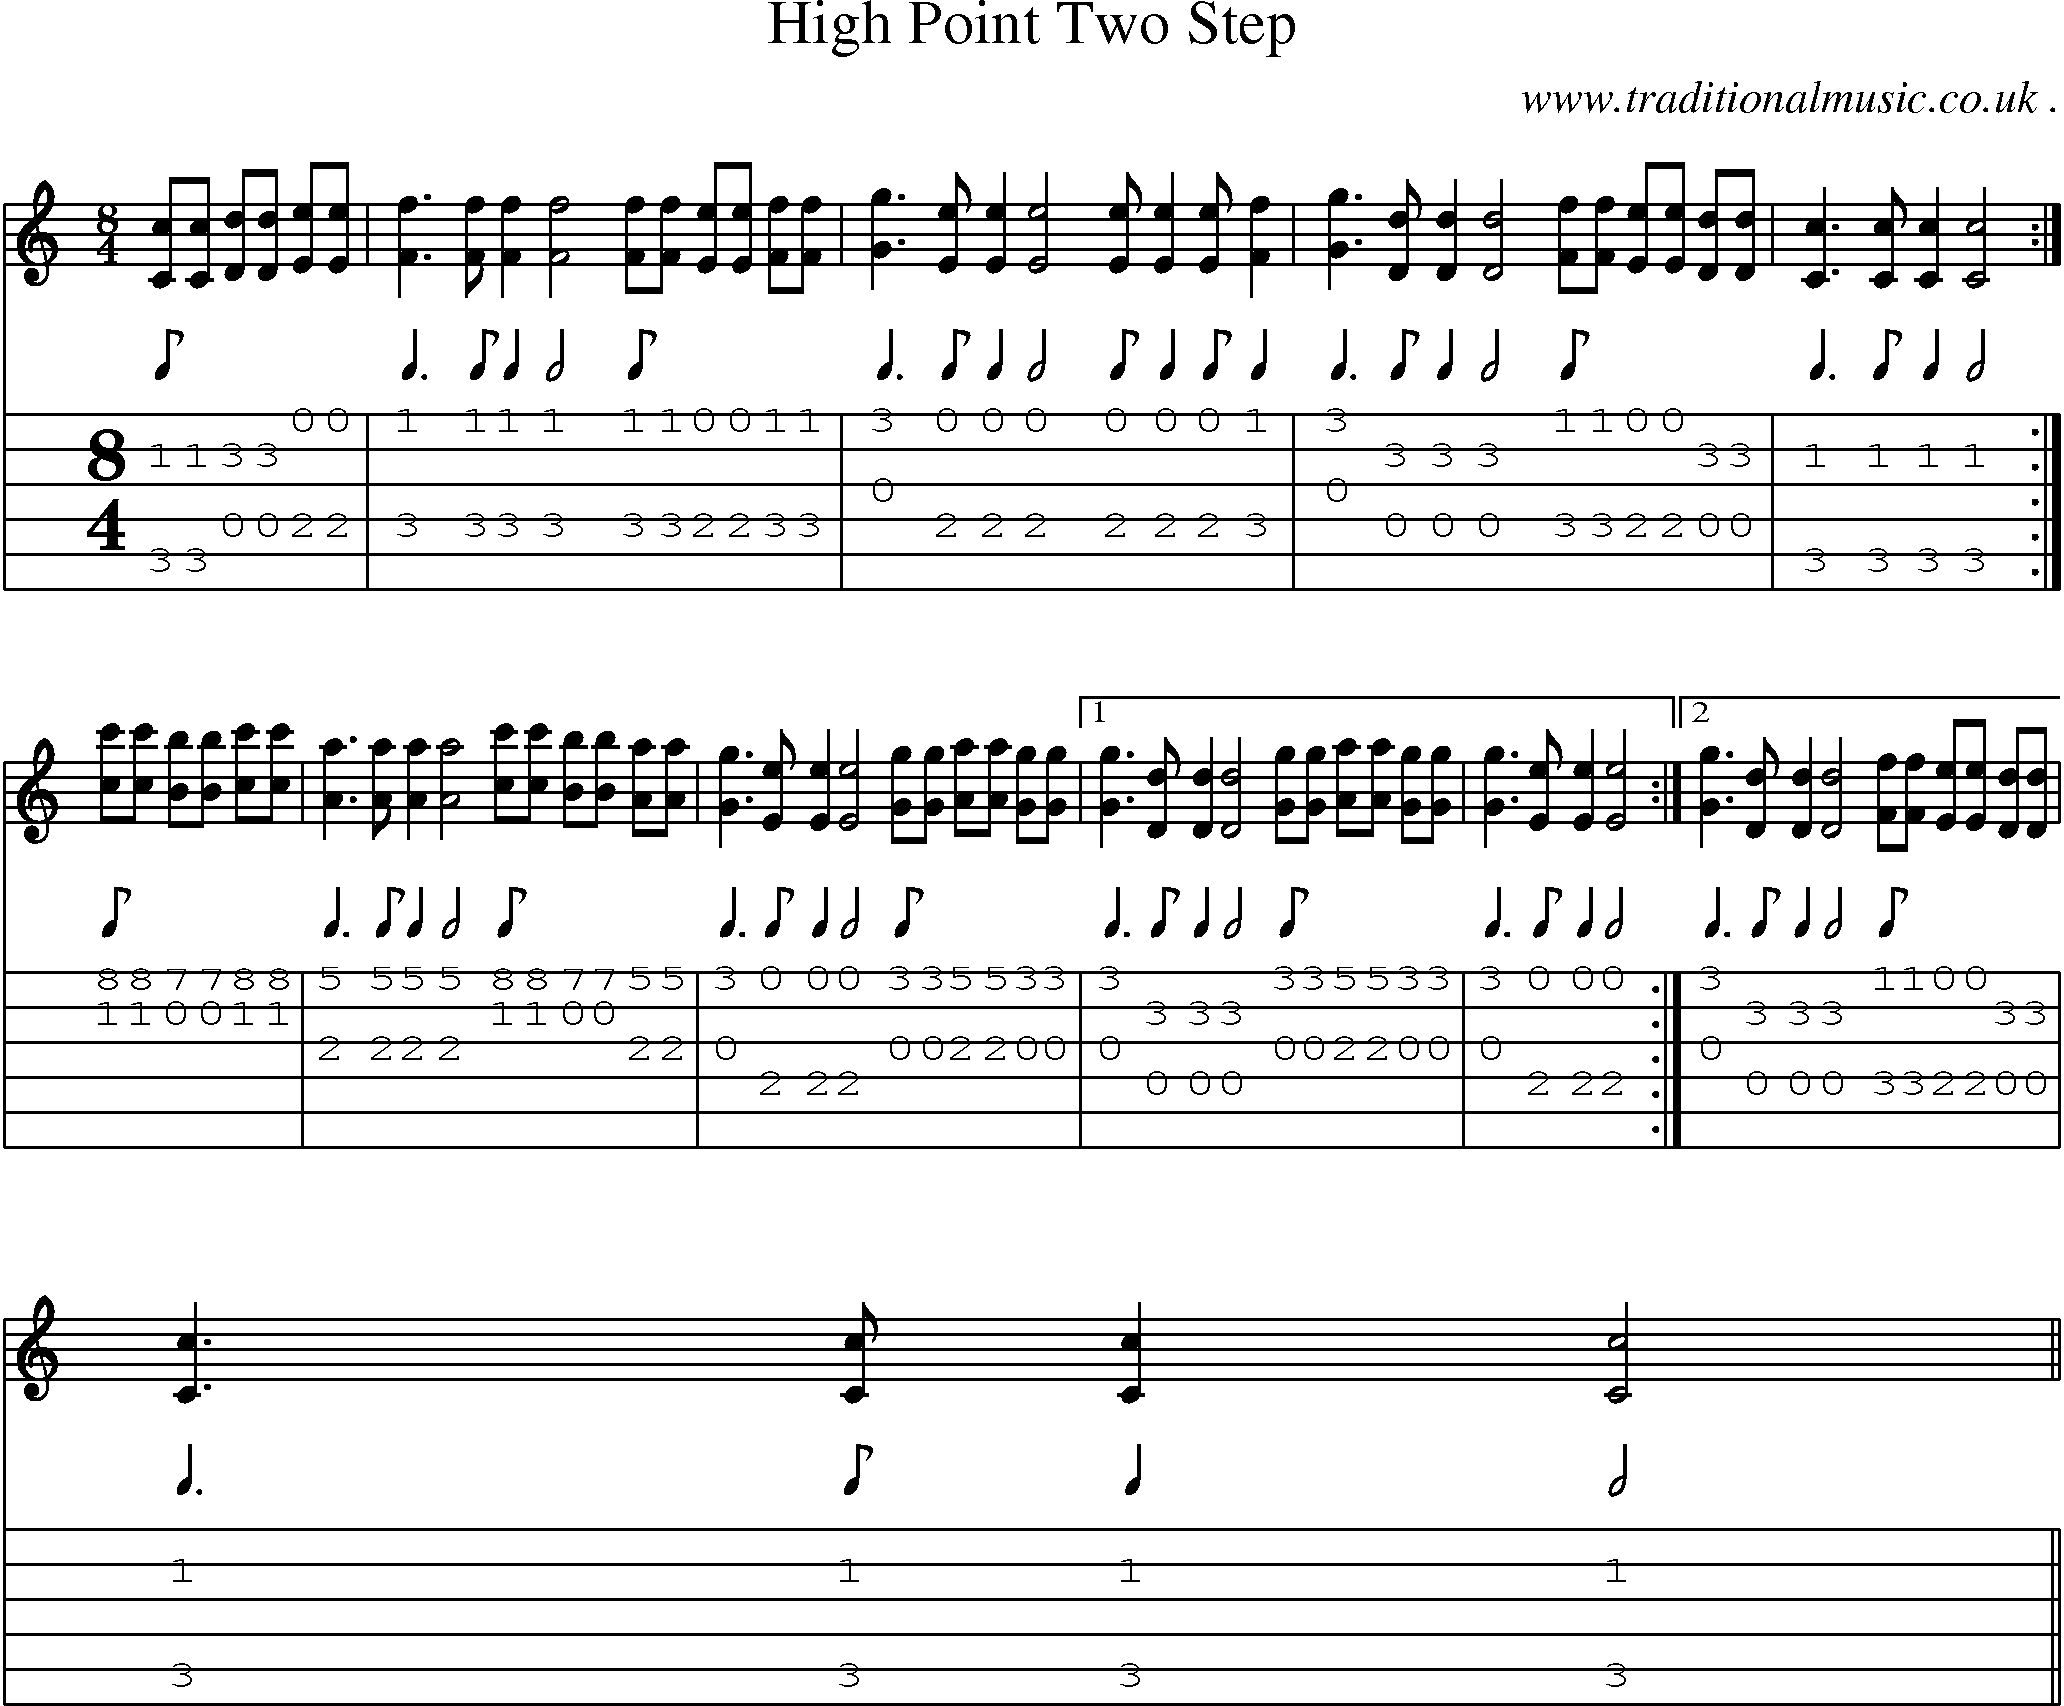 Music Score and Guitar Tabs for High Point Two Step